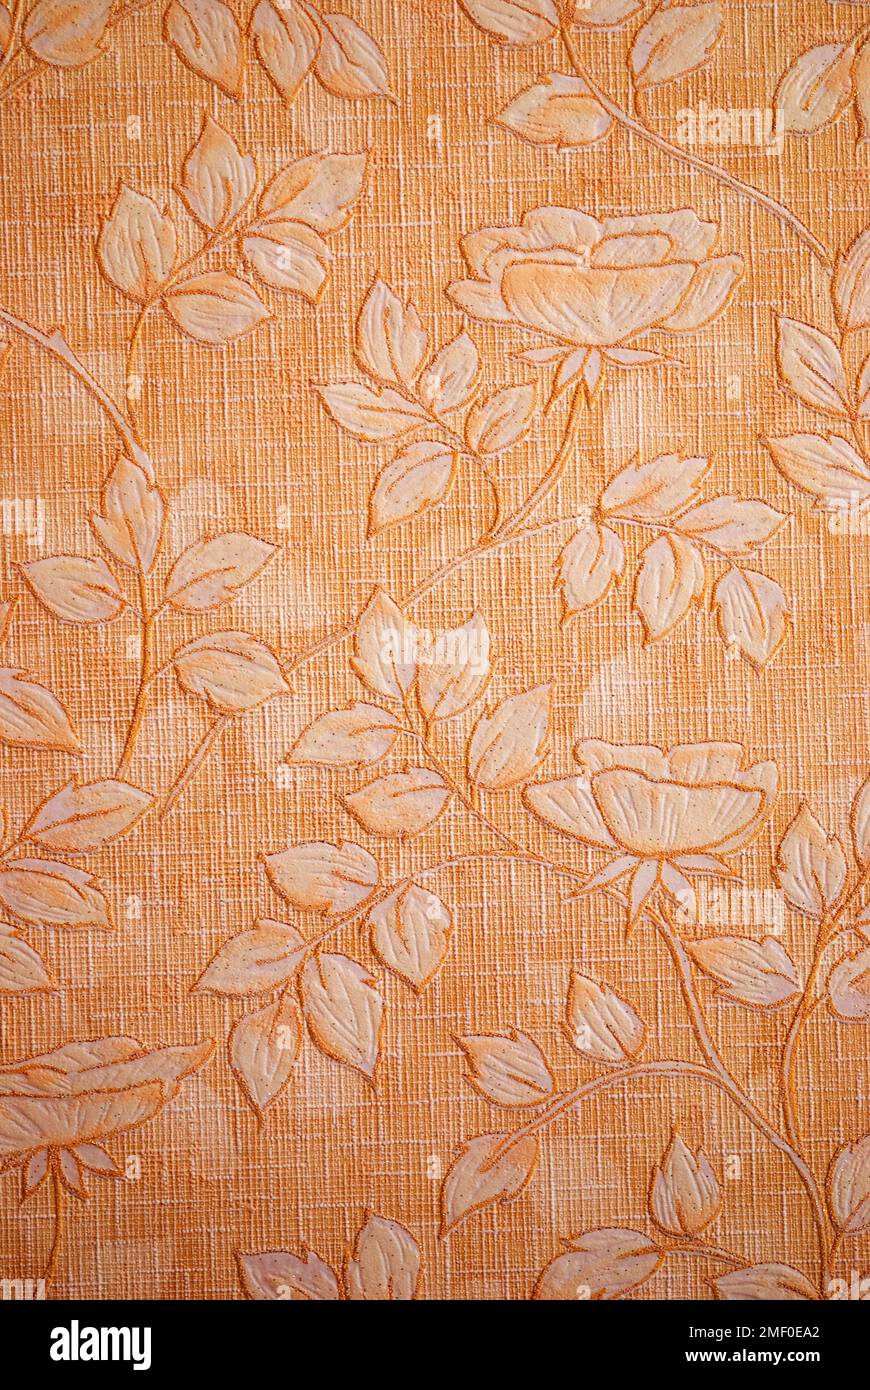 Vintage wallpaper with flower design Stock Photo